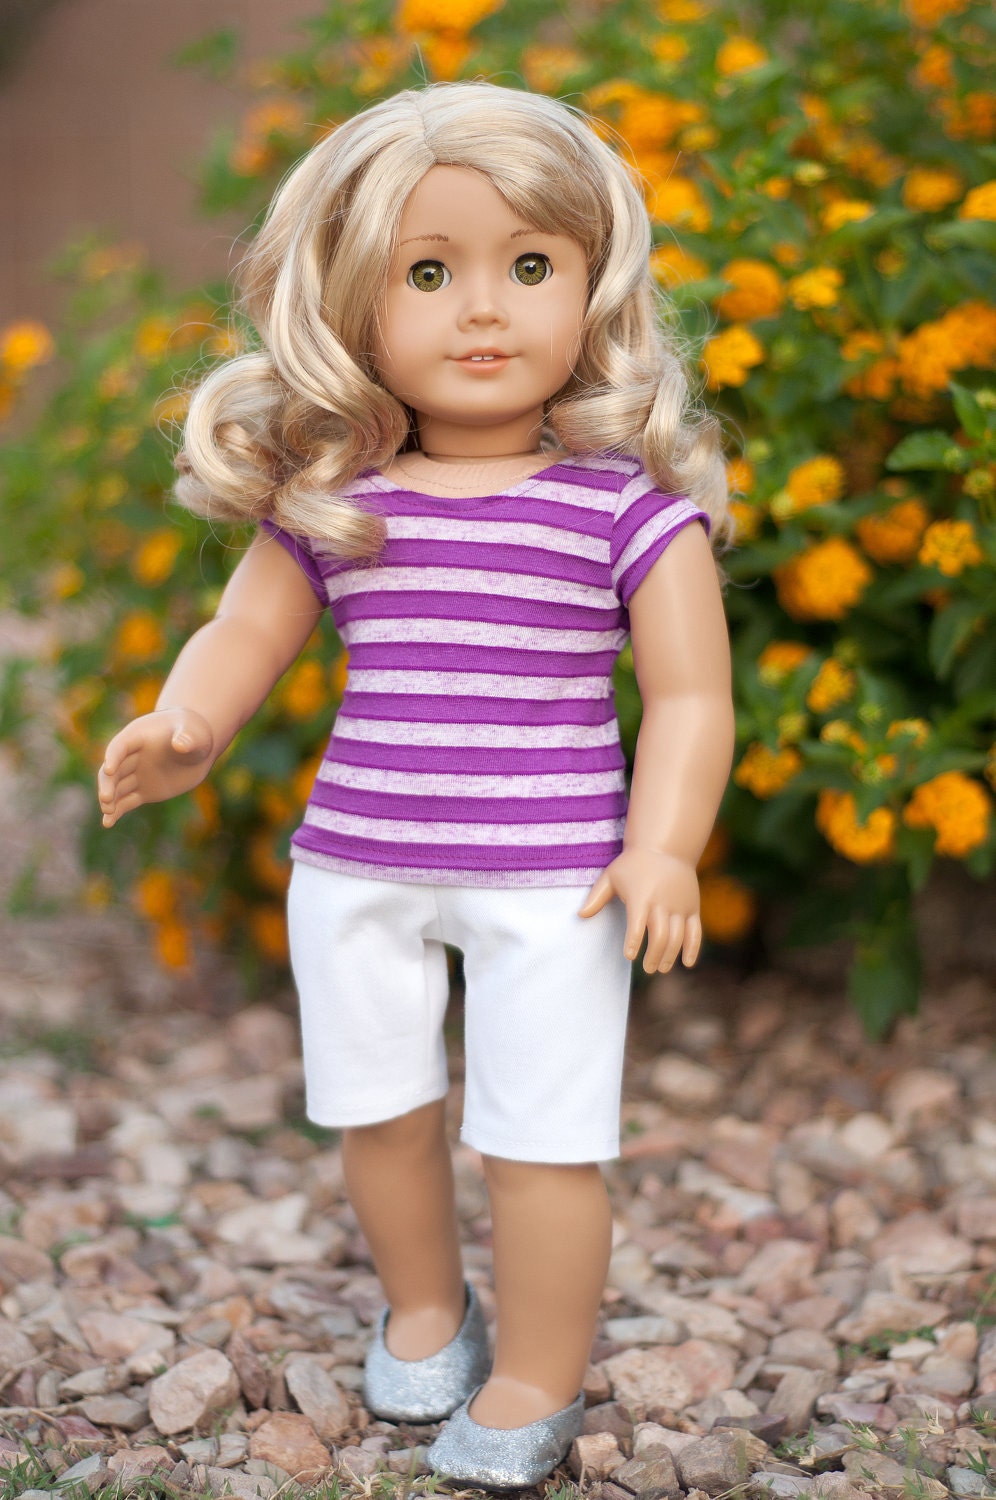 Doll Clothes: Basic White Shorts in City Walking Length for an American Girl Doll or other 18 Inch Dolls